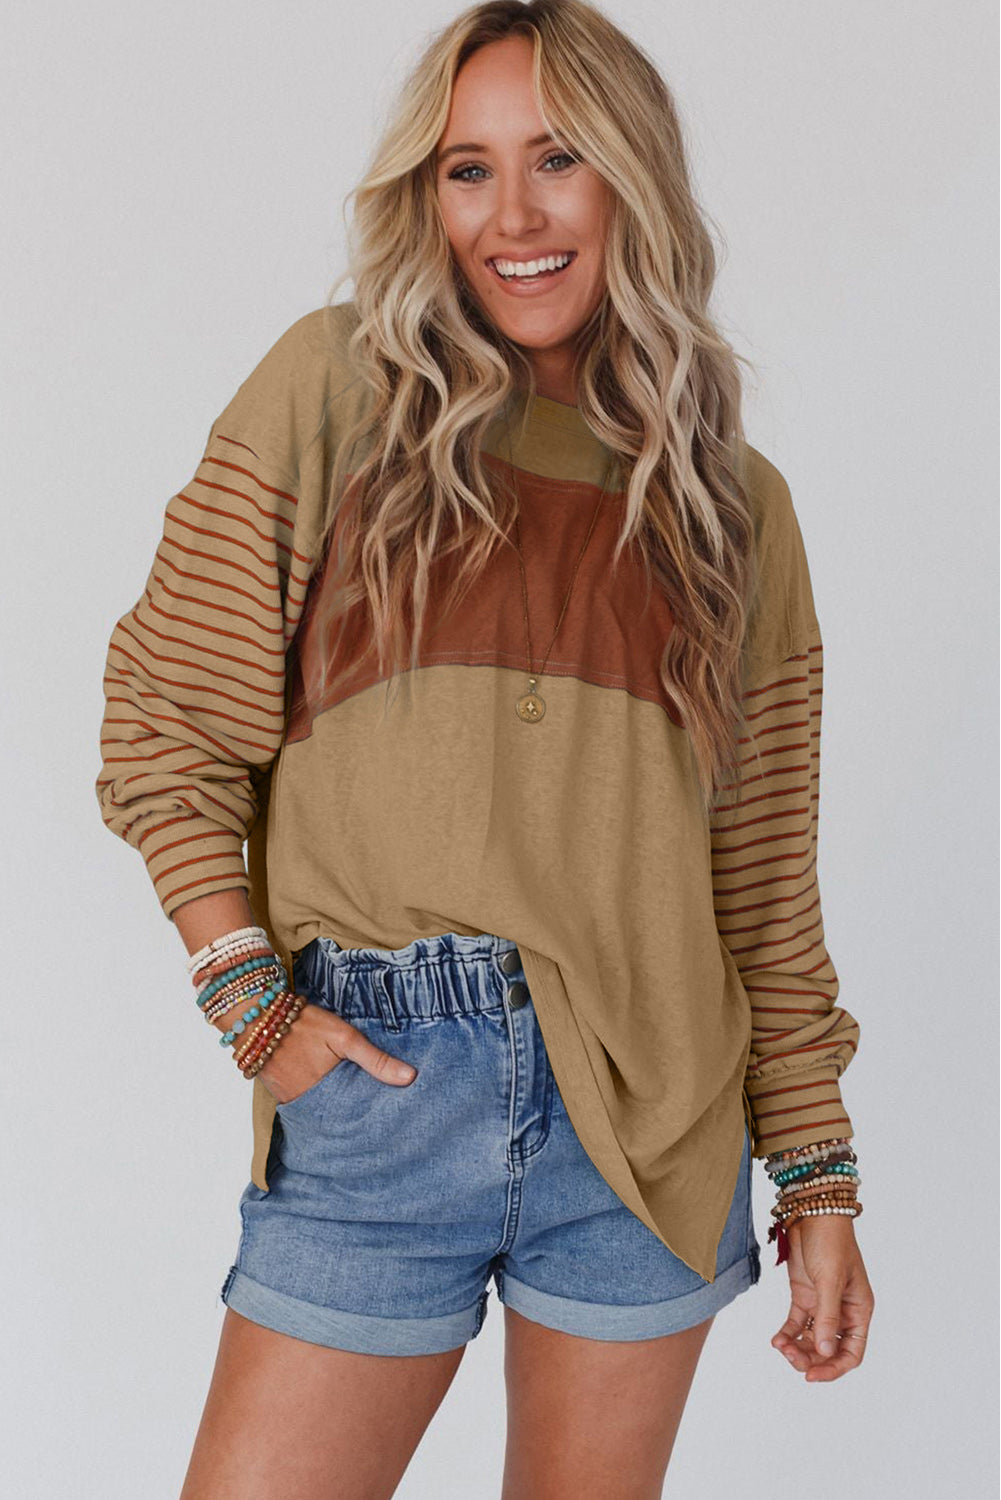 Cali Chic Flaxen Color Block Striped Bishop Sleeve Top